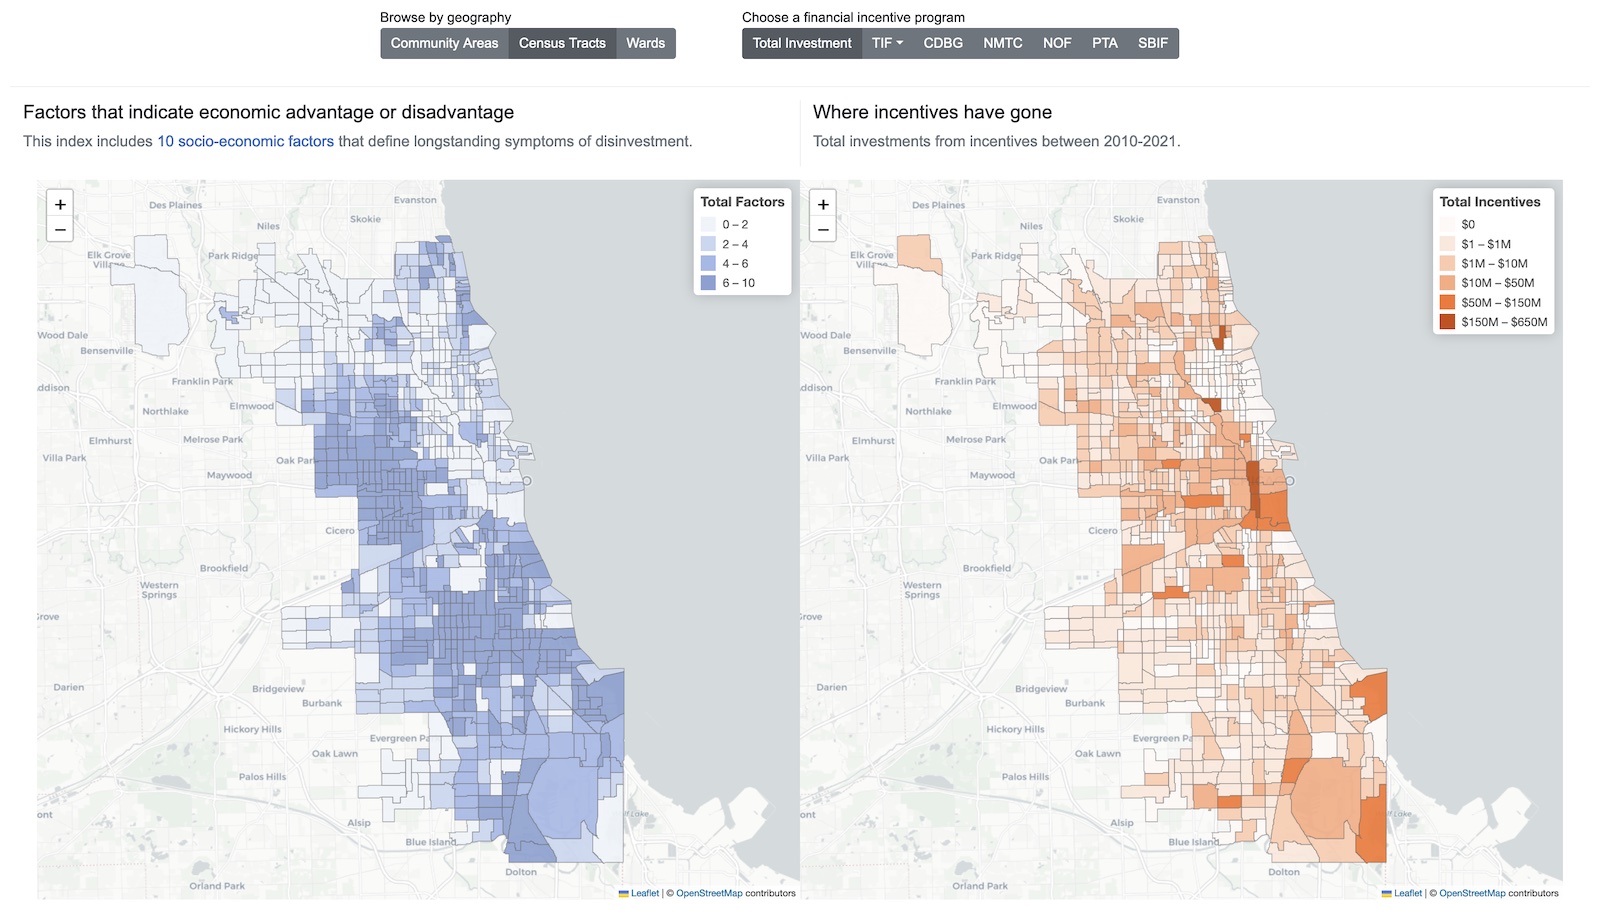 Browse US Census Tracts and compare what areas have greater economic disadvantage and where funding has gone from Chicago incentive programs